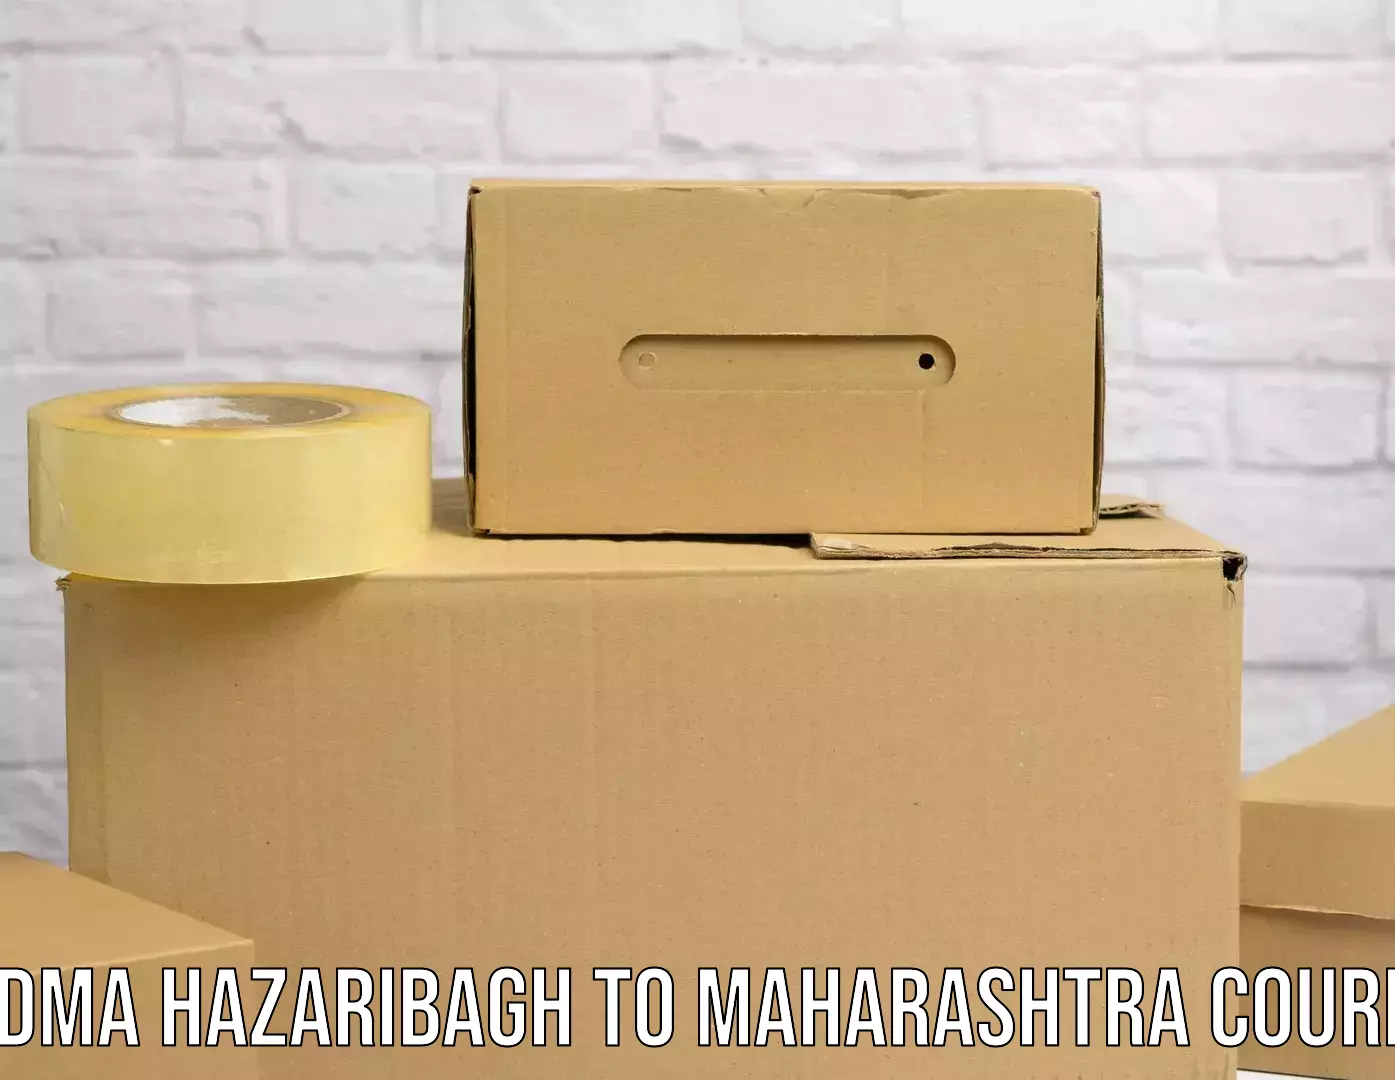 Express package services Padma Hazaribagh to Panvel